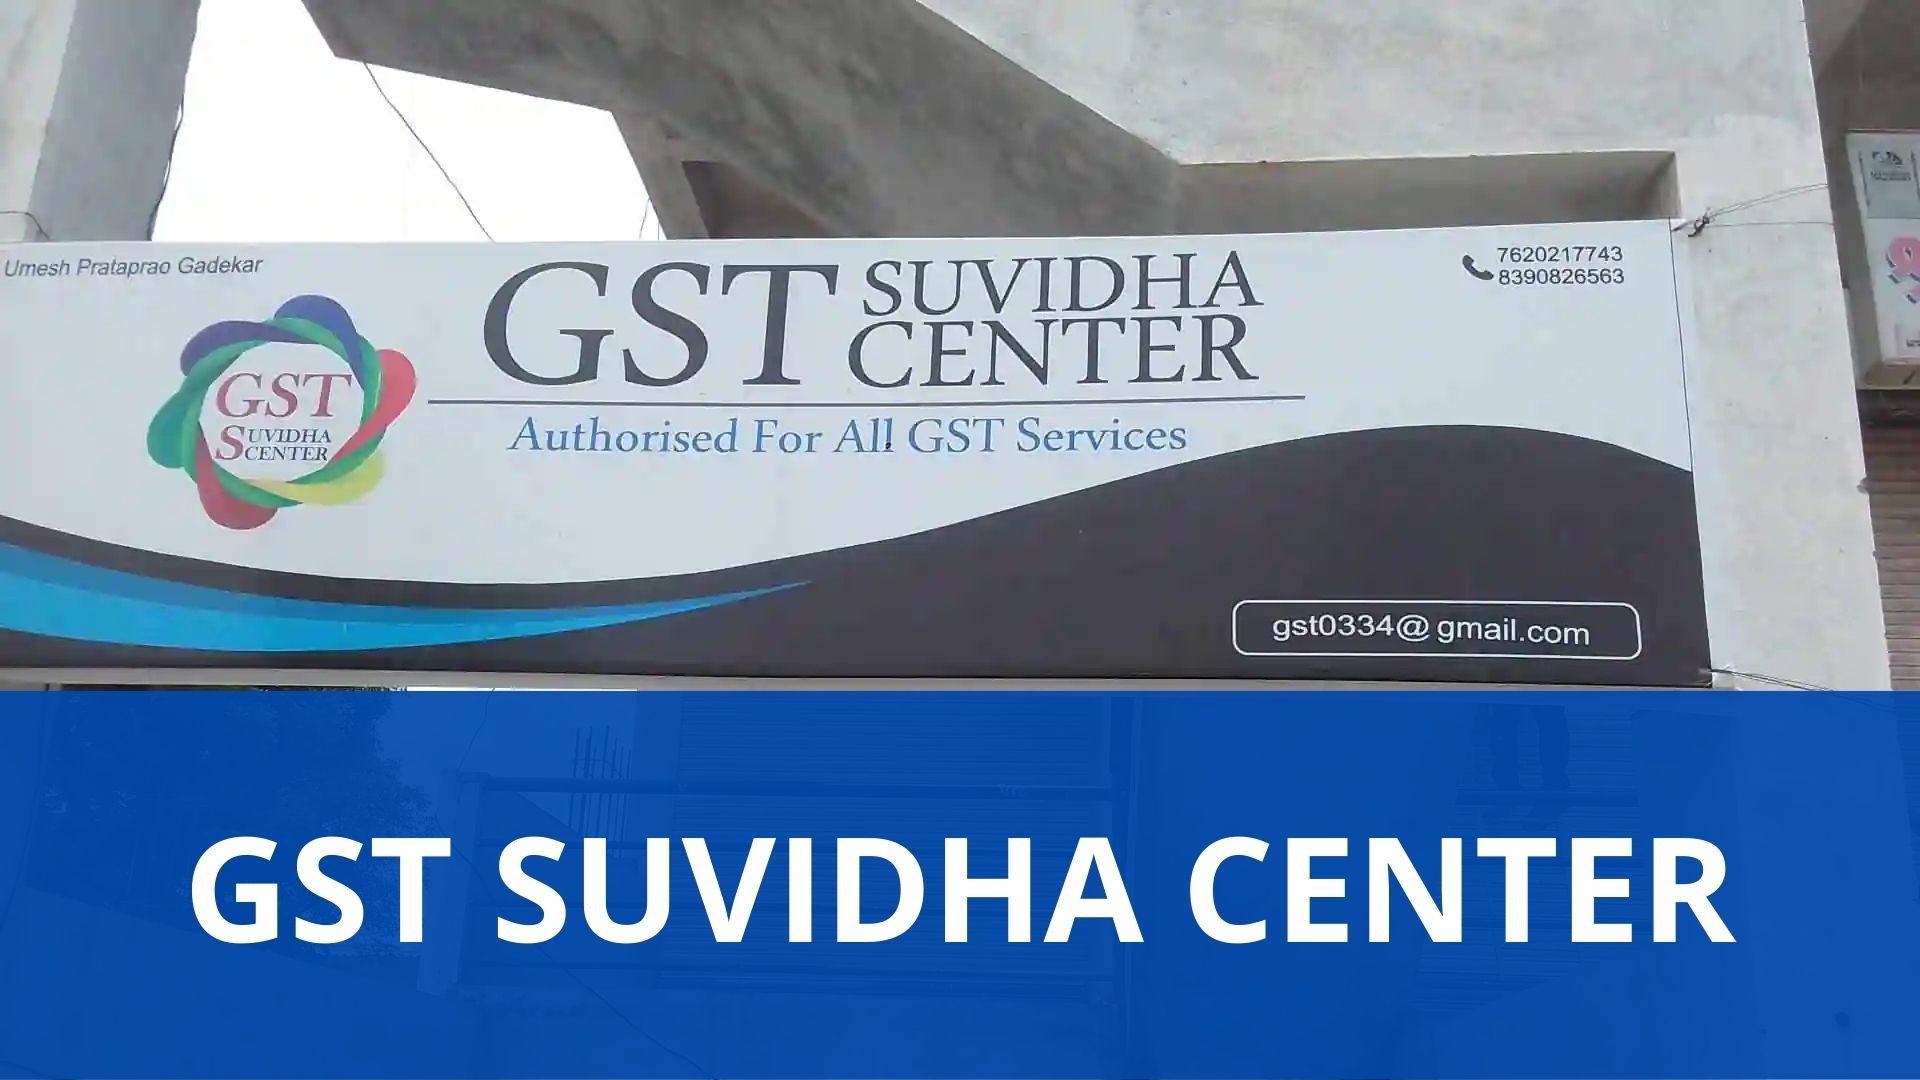 What are the benefits of gst suvidha kendra